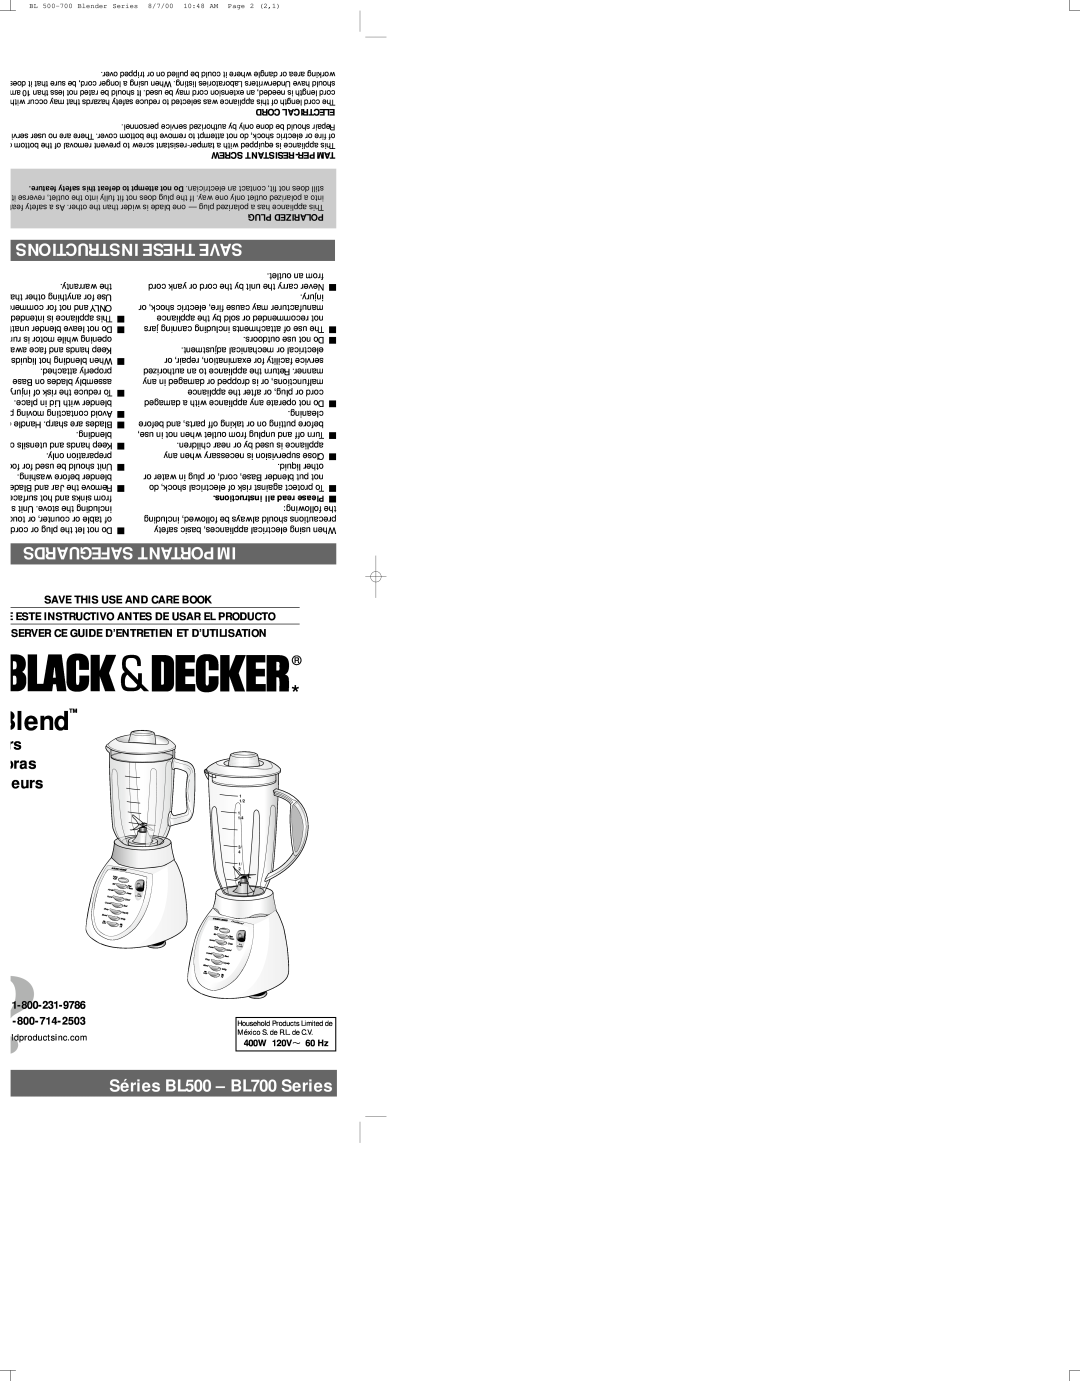 Black & Decker Instructions These Save, Safeguards Important, Séries BL500 - BL700 Series, Save This Use And Care Book 